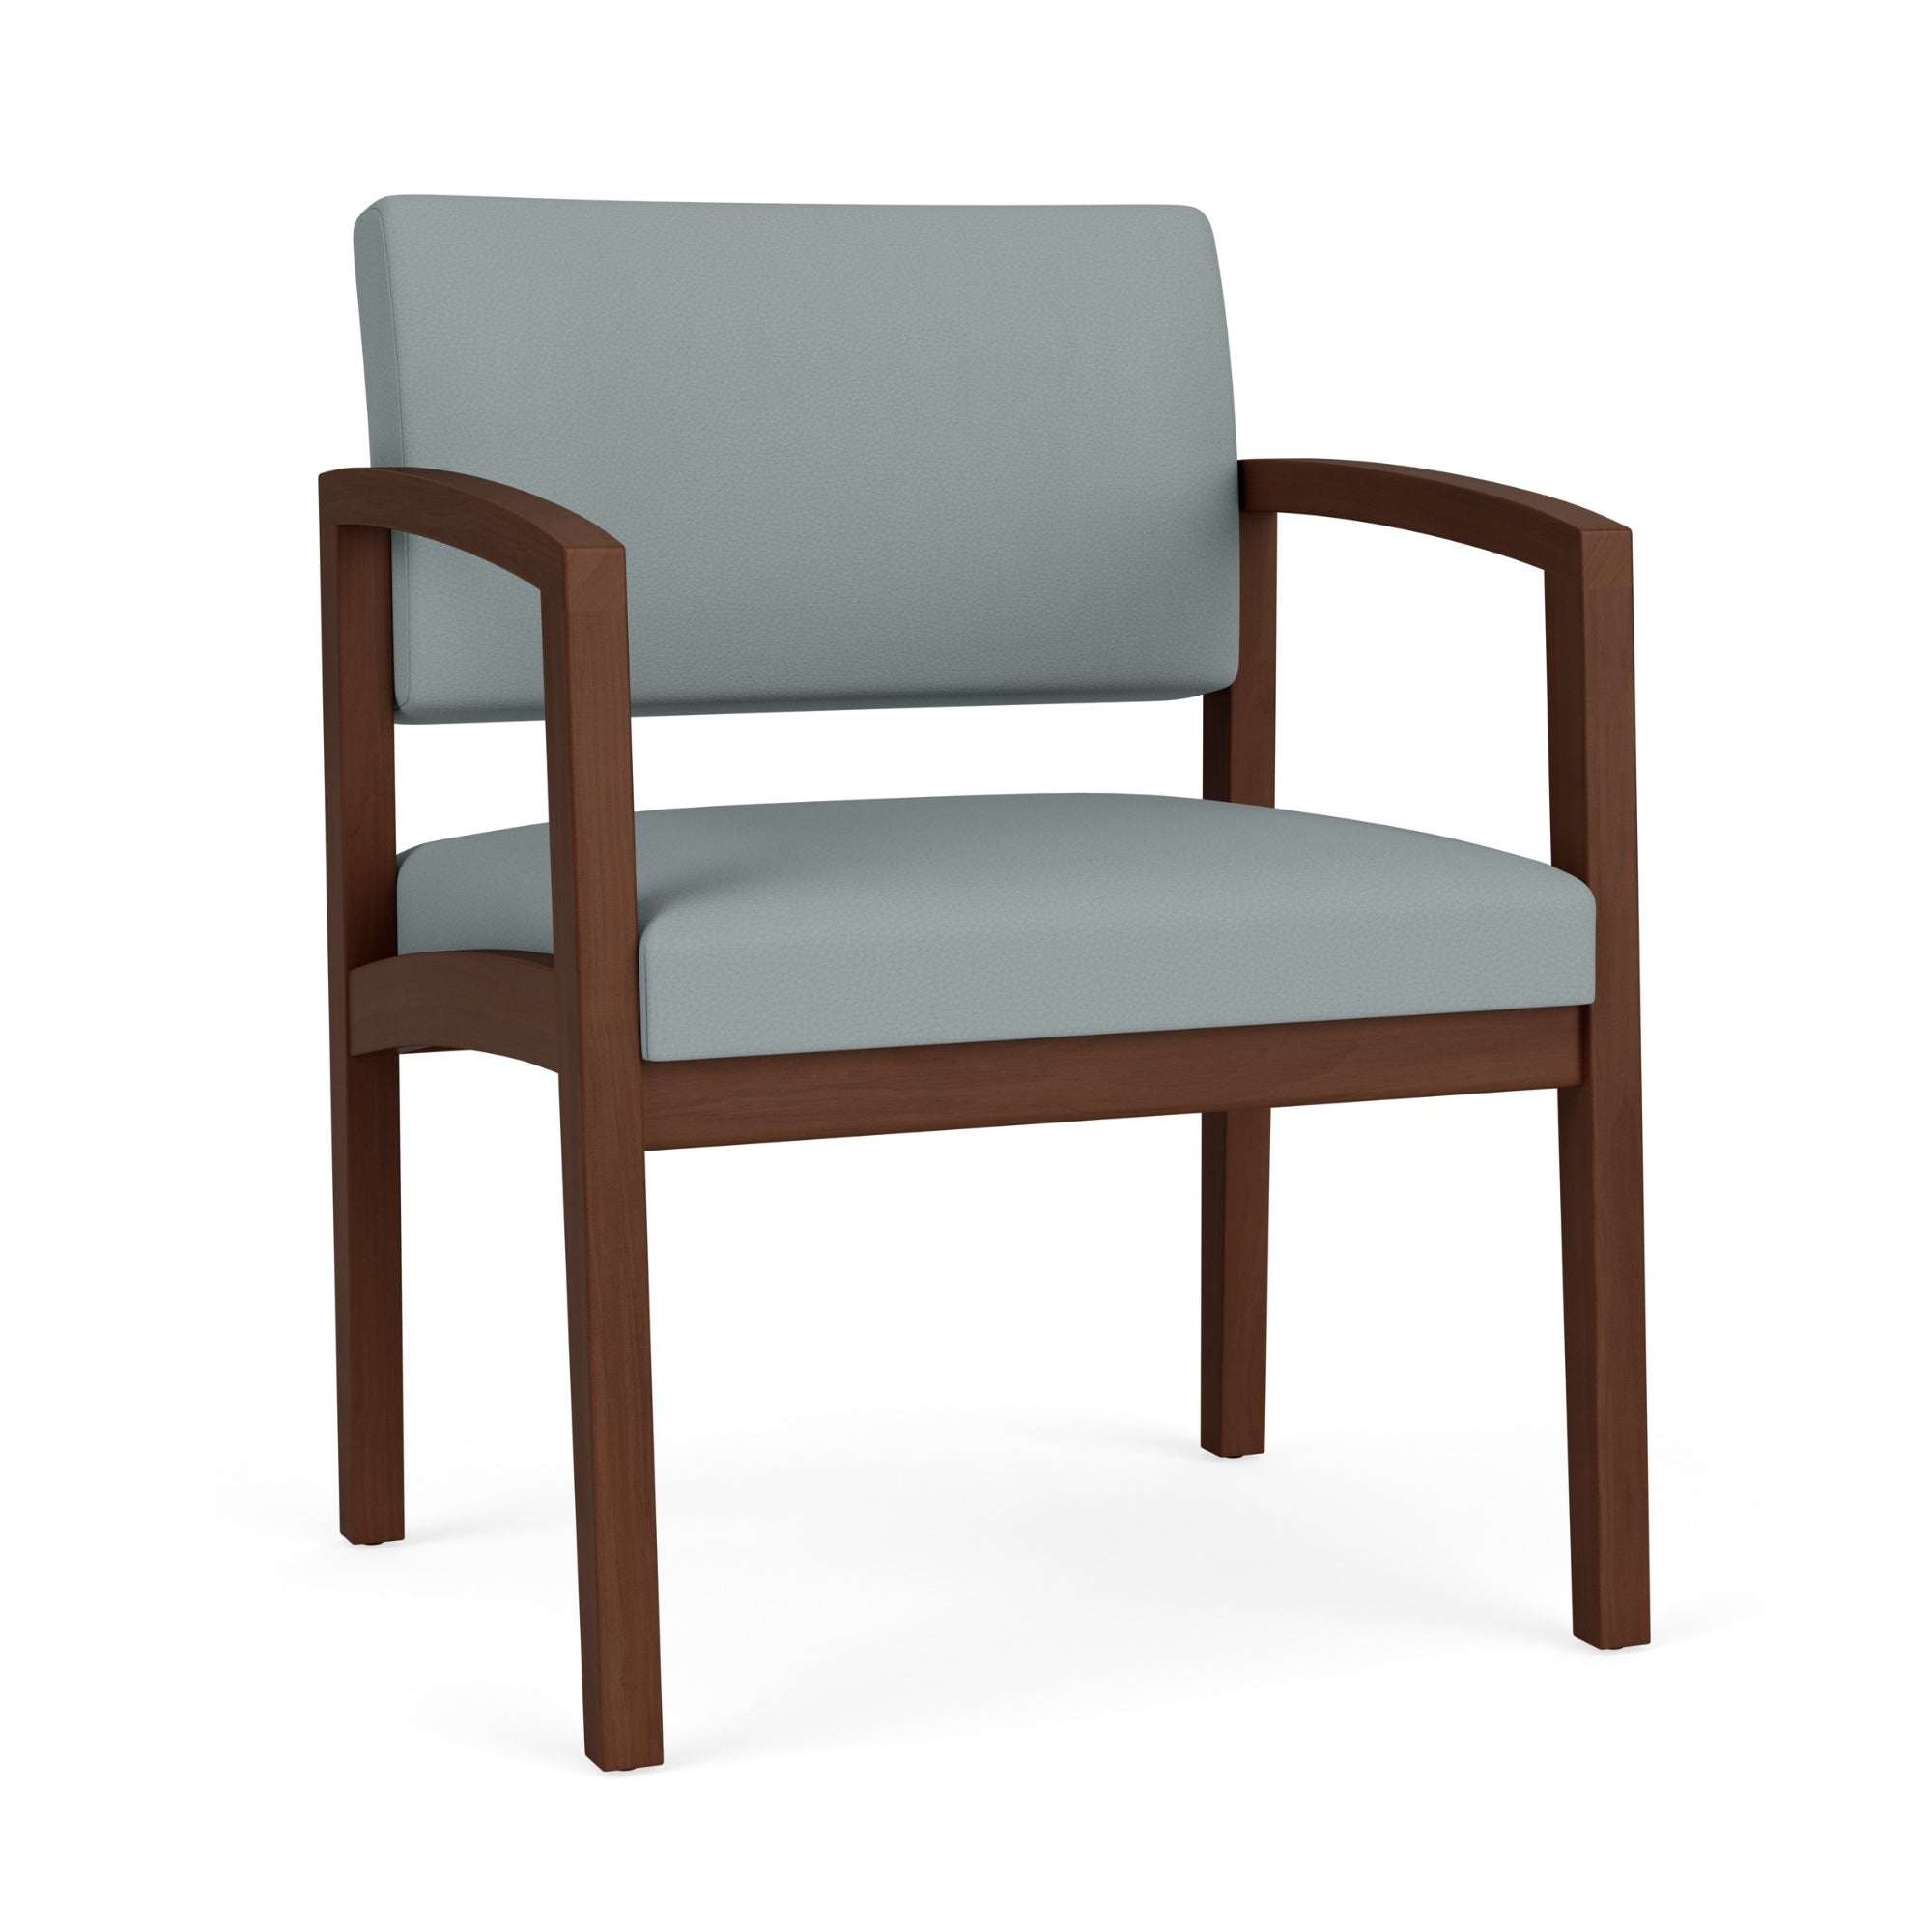 Lenox Wood Collection Reception Seating, Oversize Guest Chair, 400 lb. Capacity, Standard Vinyl Upholstery, FREE SHIPPING